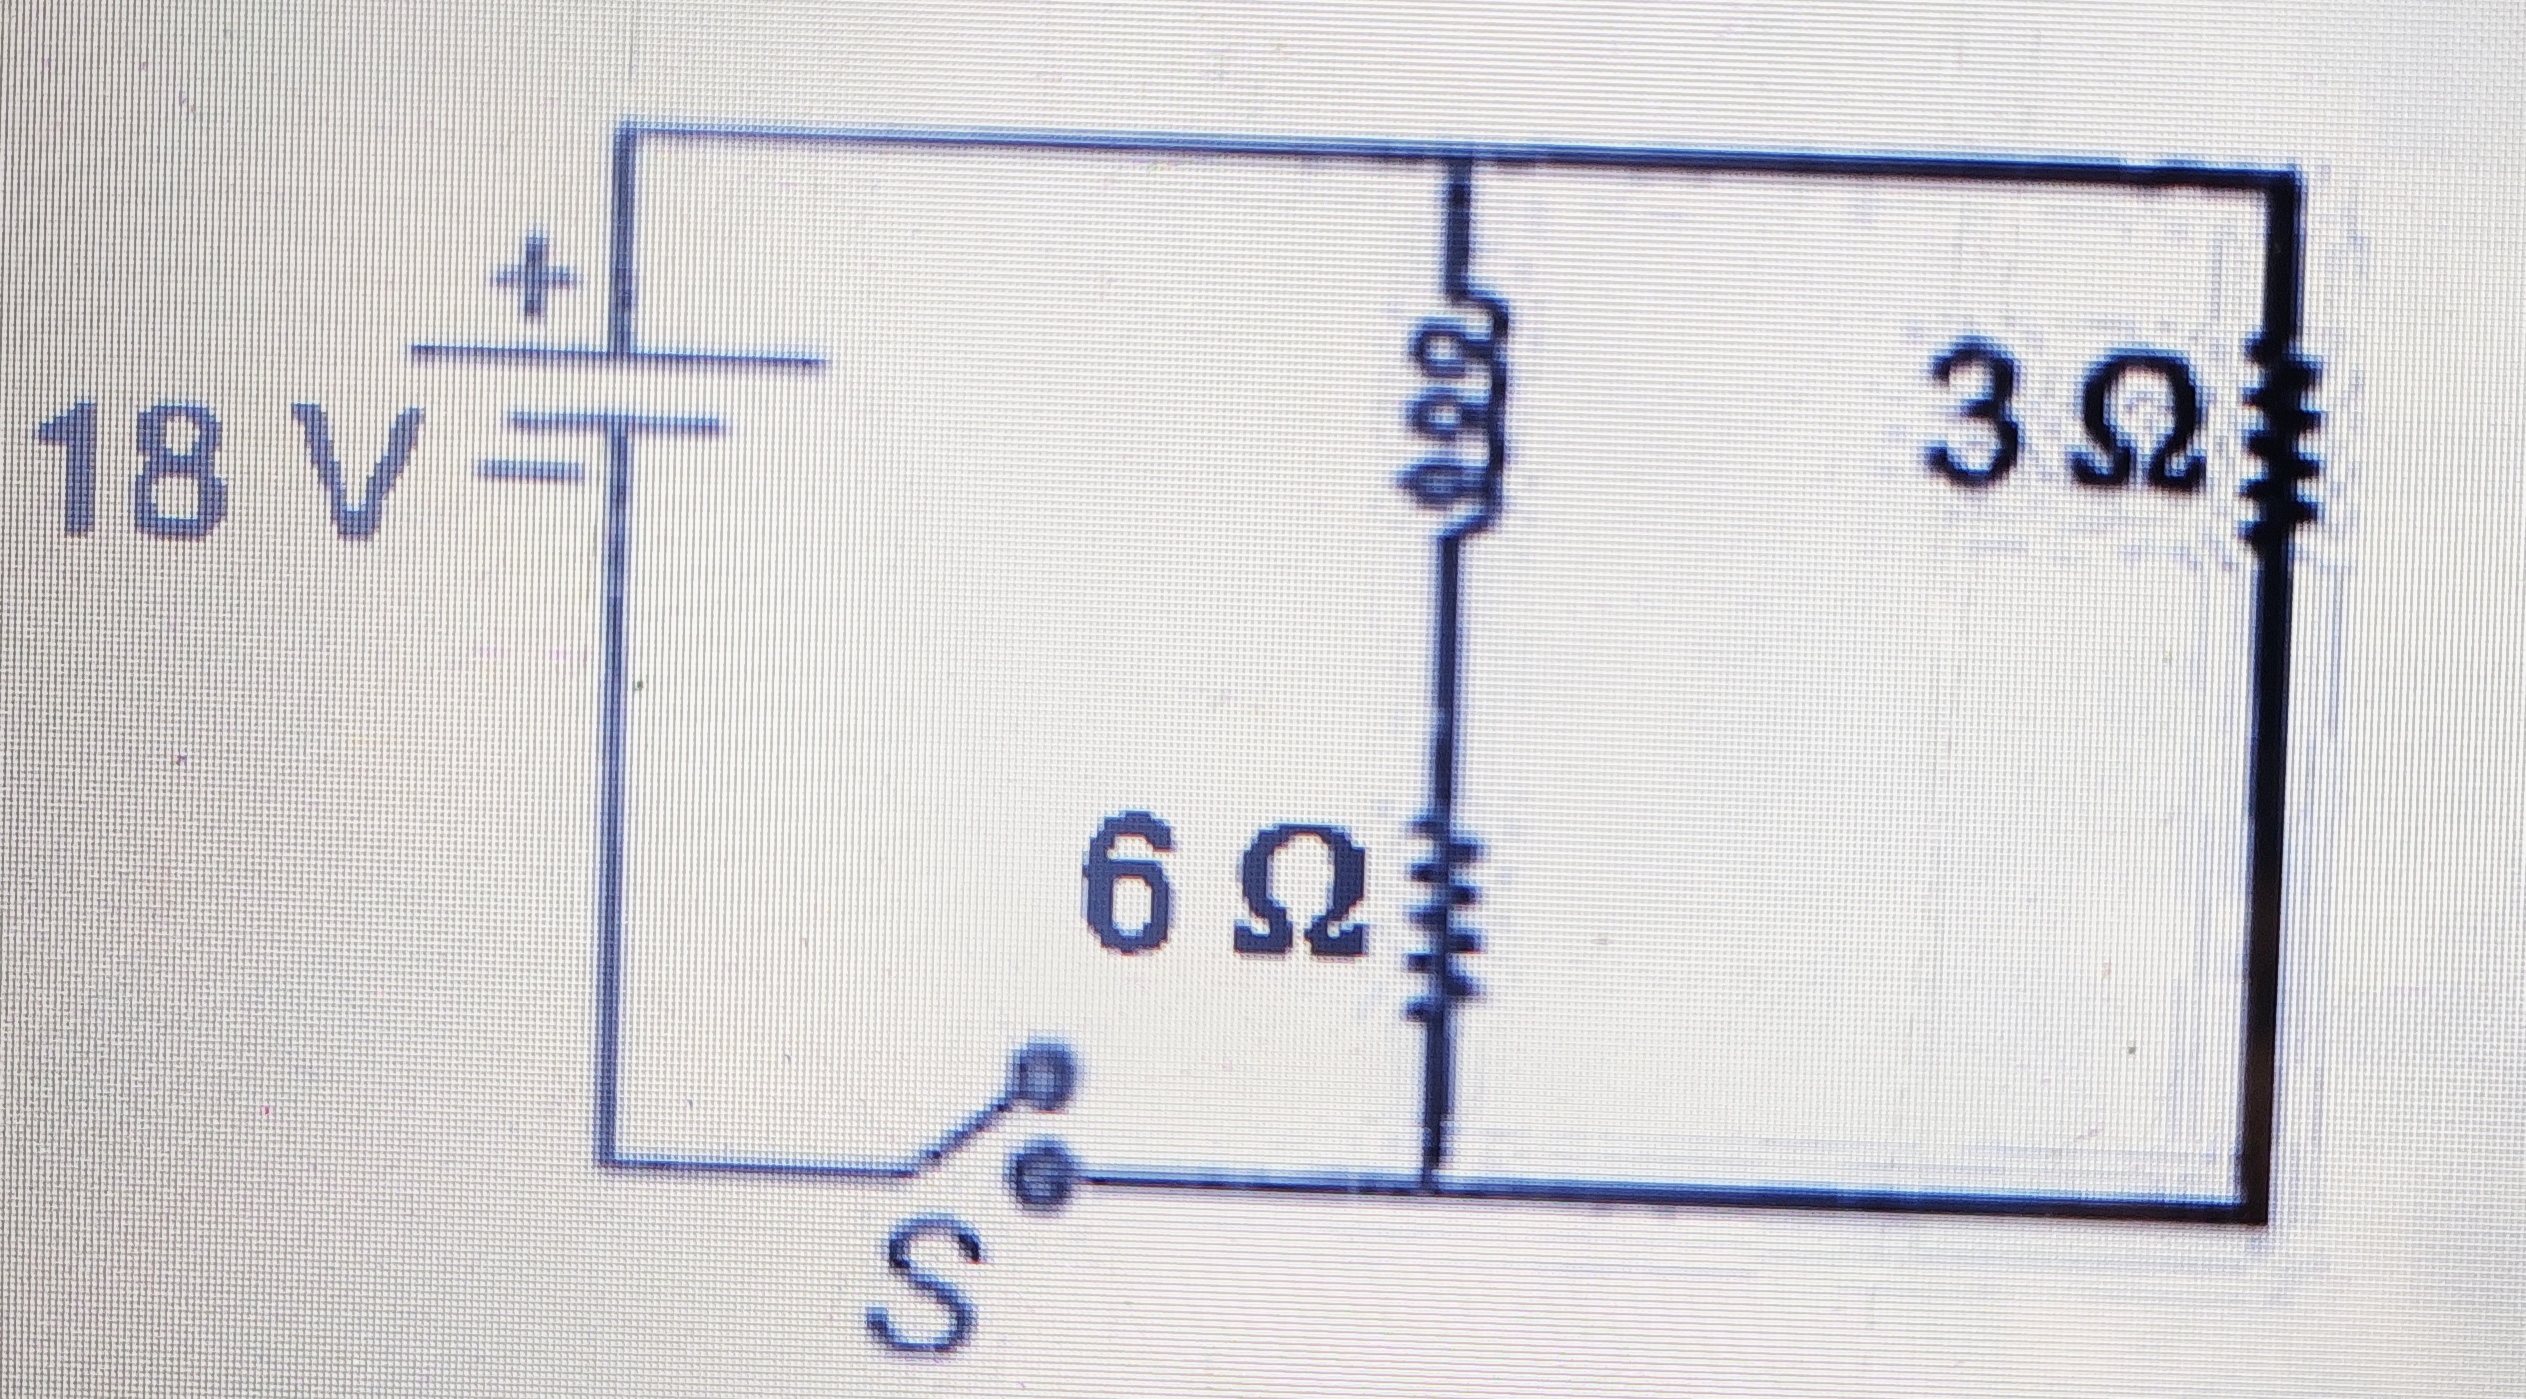 In the following circuit the value of current i through the battery just after switch S is closed is